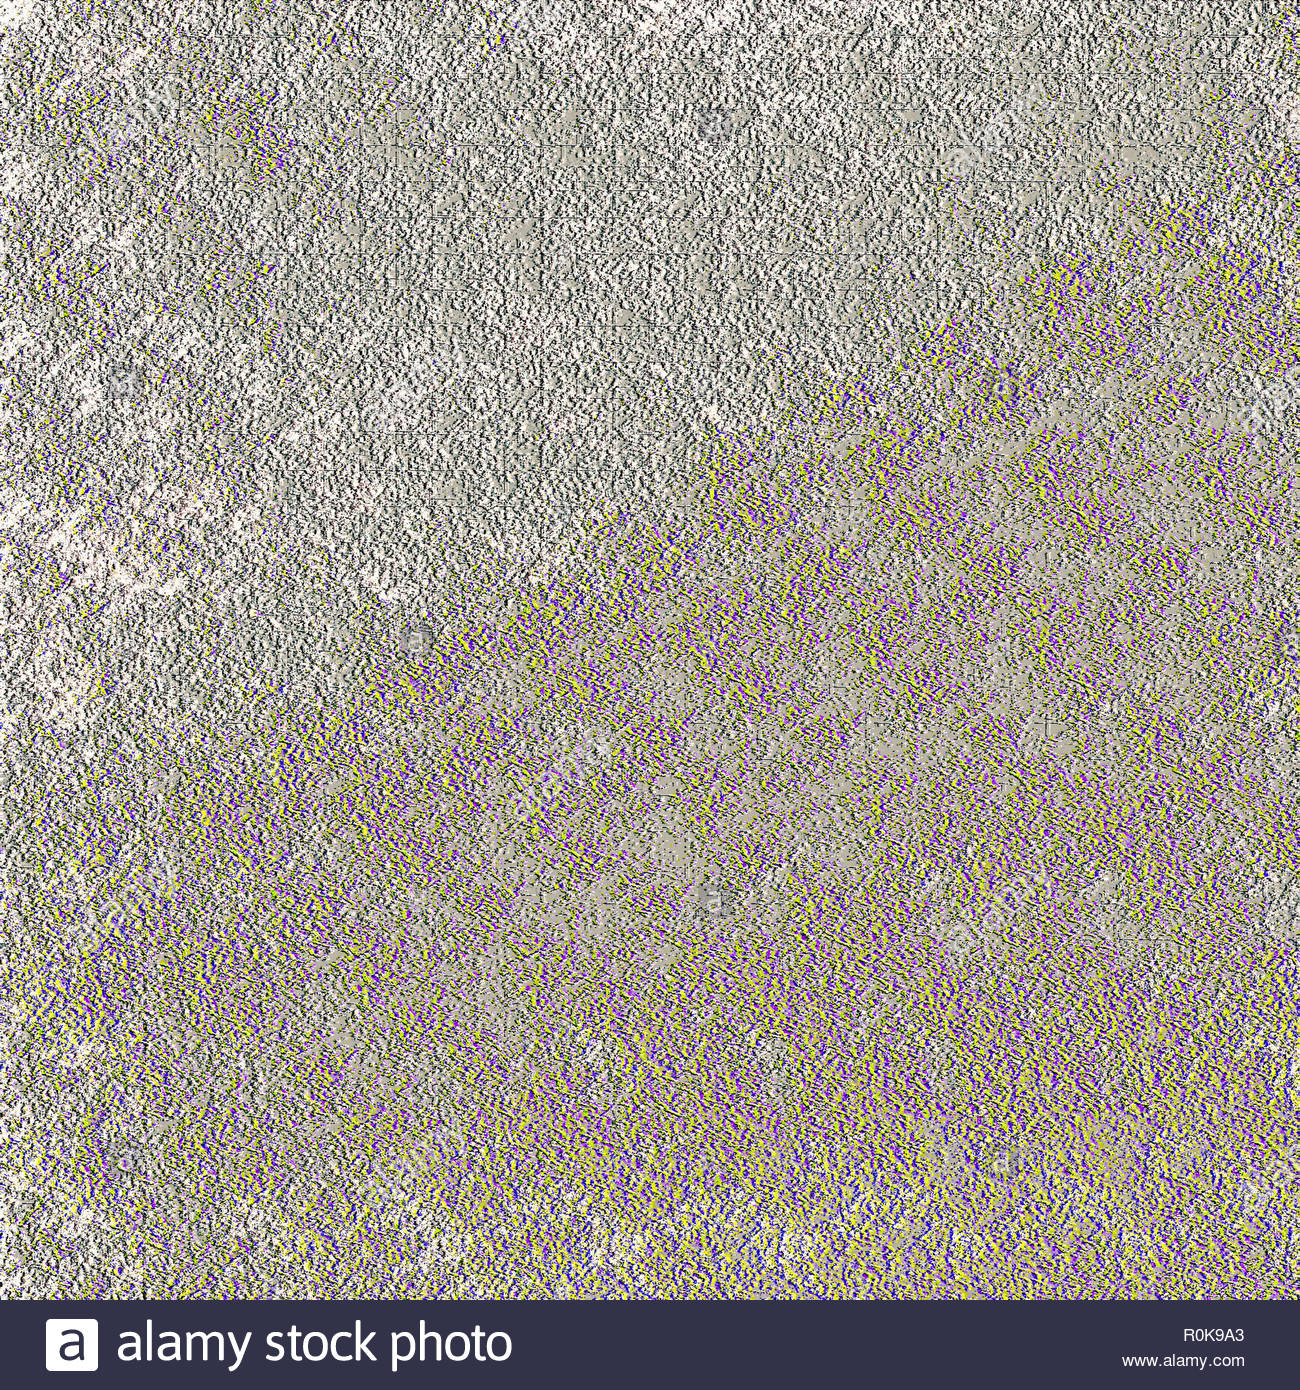 Grungy Abstract Background Concrete Texture For